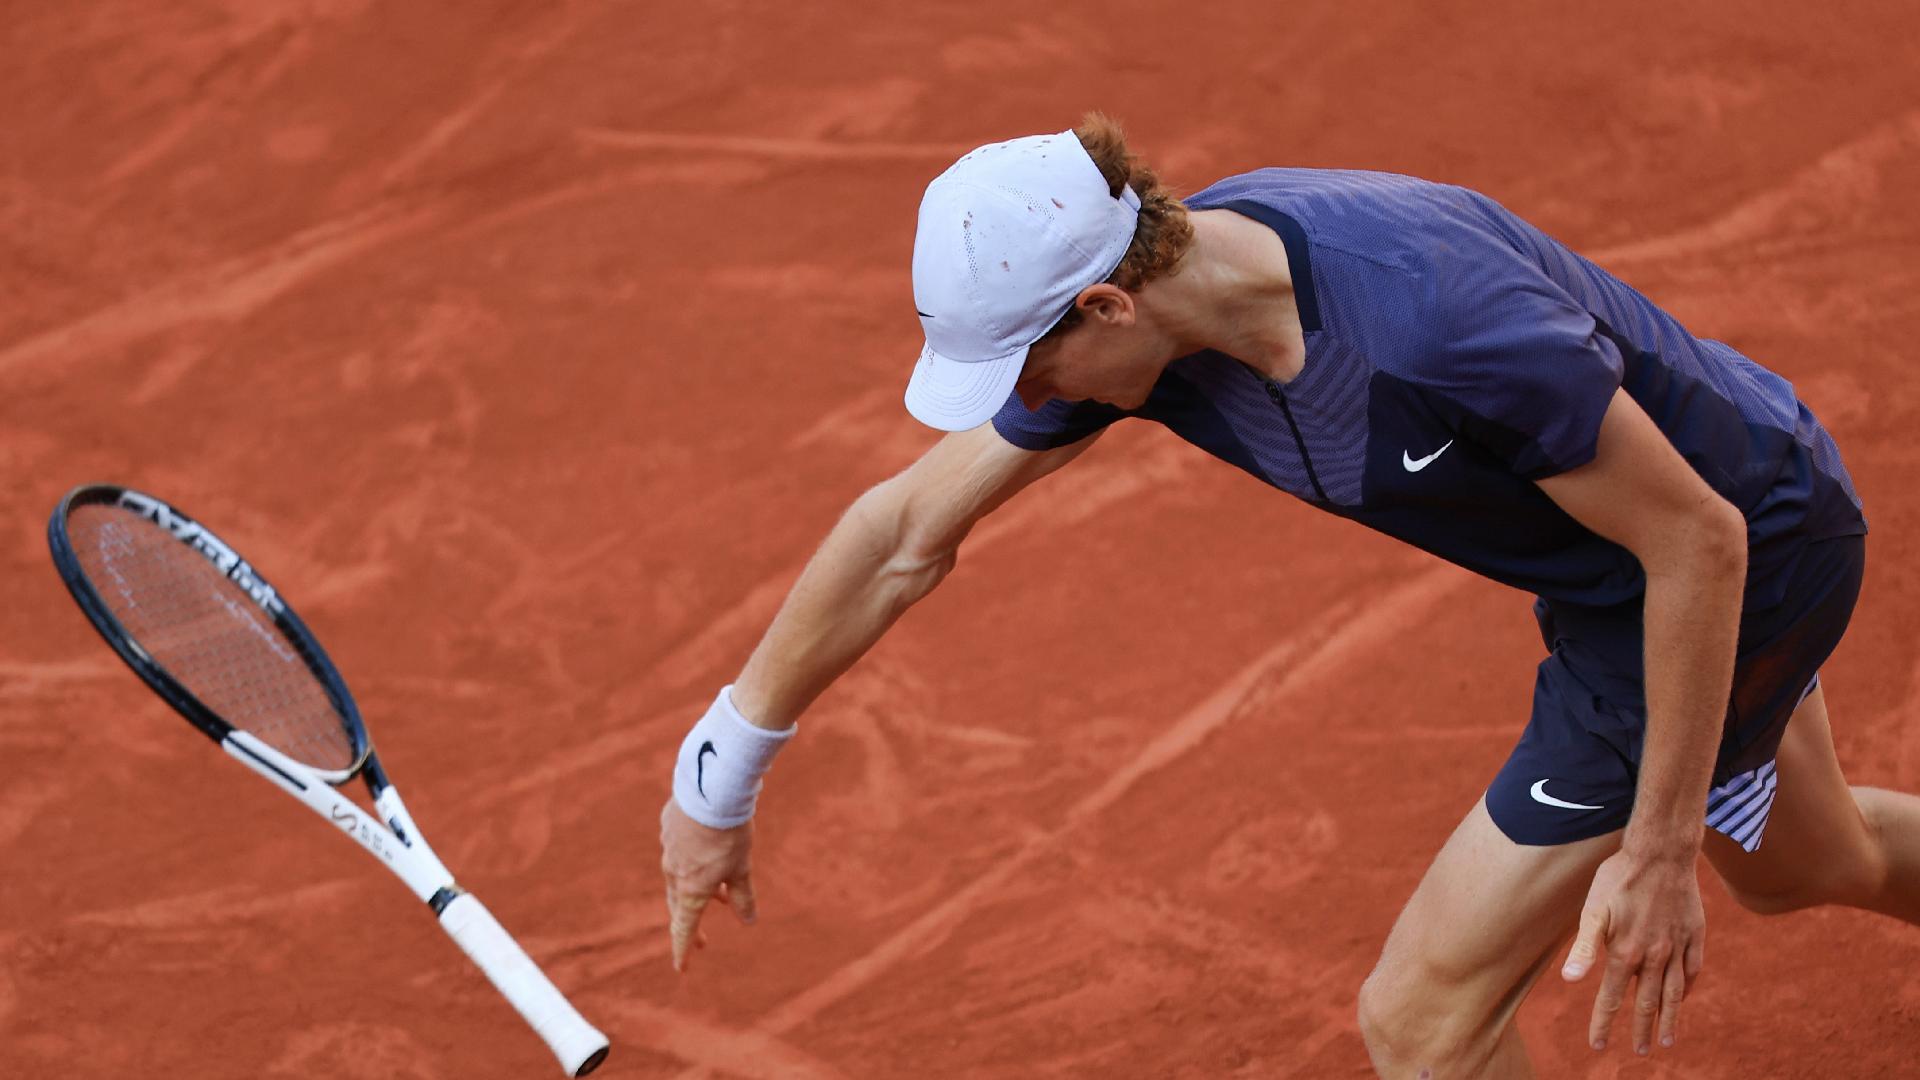 Sinner knocked out of French Open after five-h beIN SPORTS